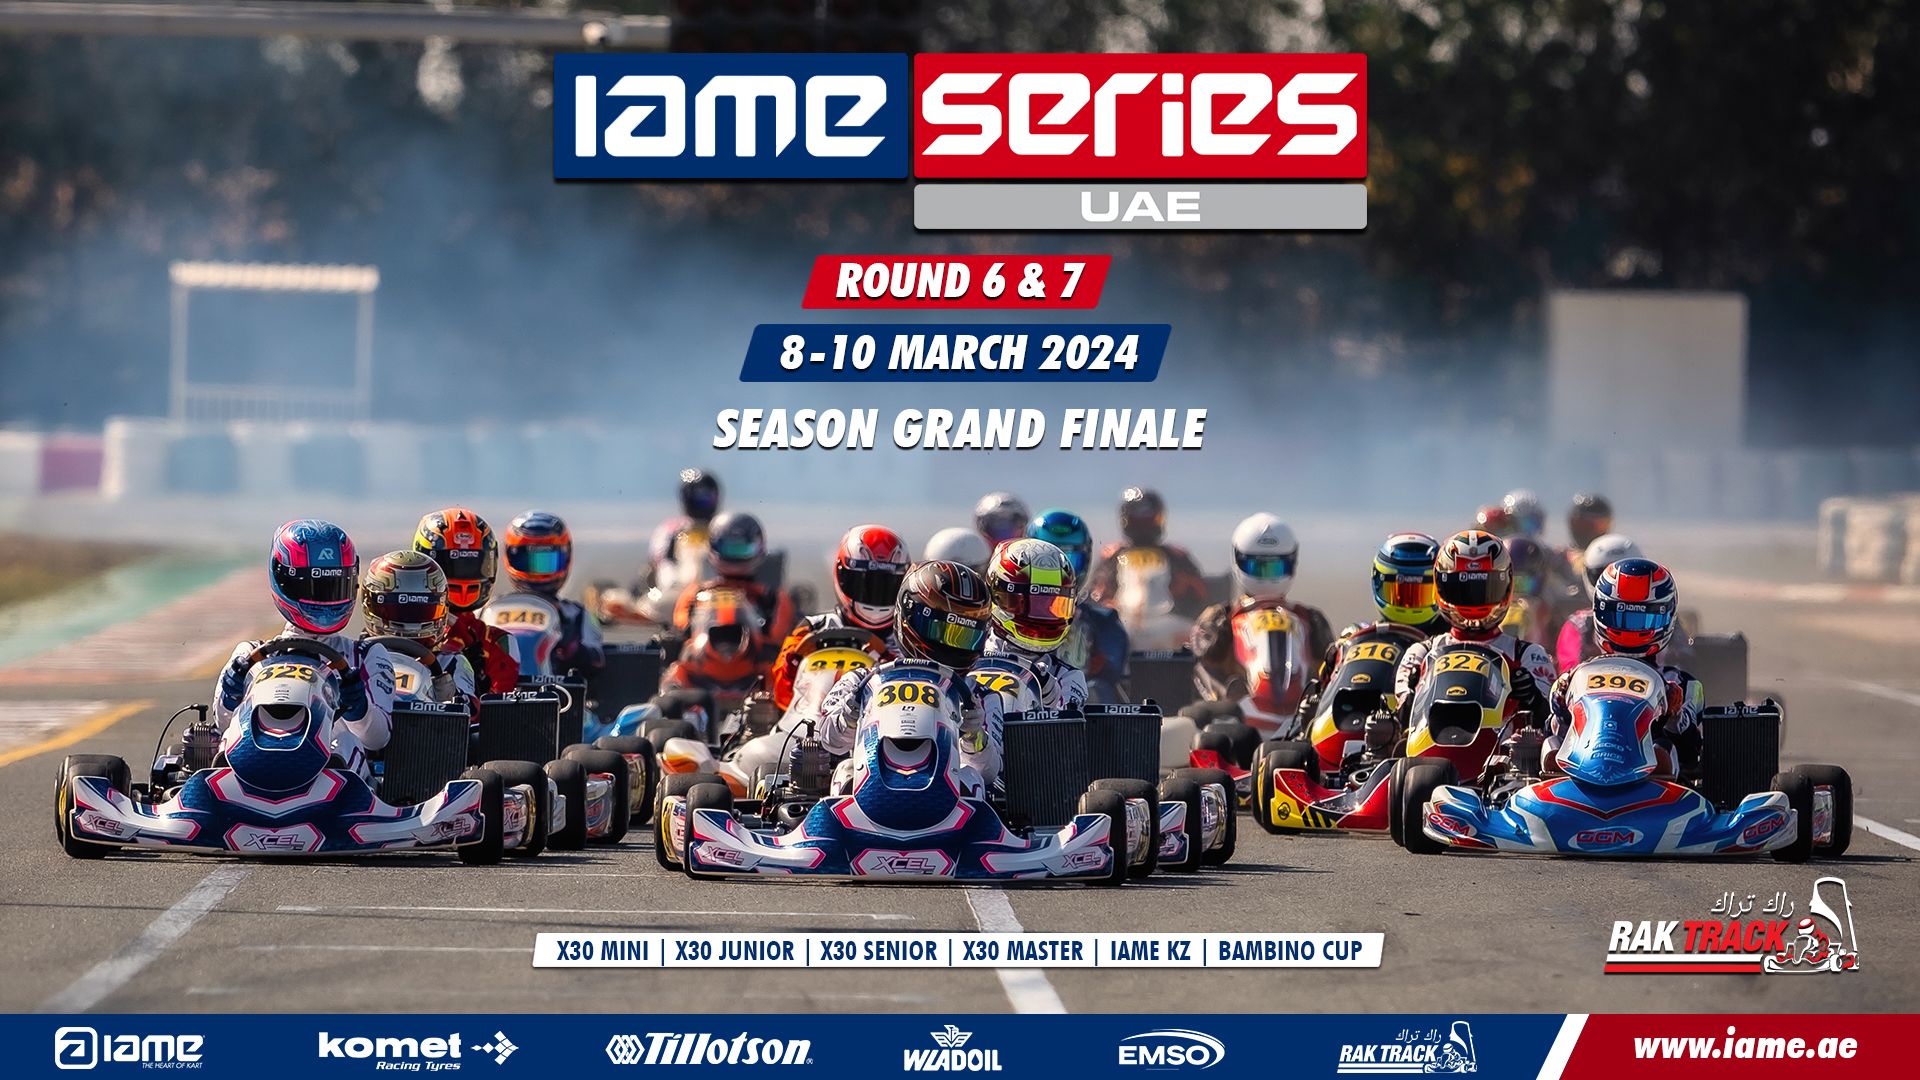 The Final Results of IAME Series UAE, Round 7, Held at Rak Track, Ras Al Khaimah On the 10th of March 2024